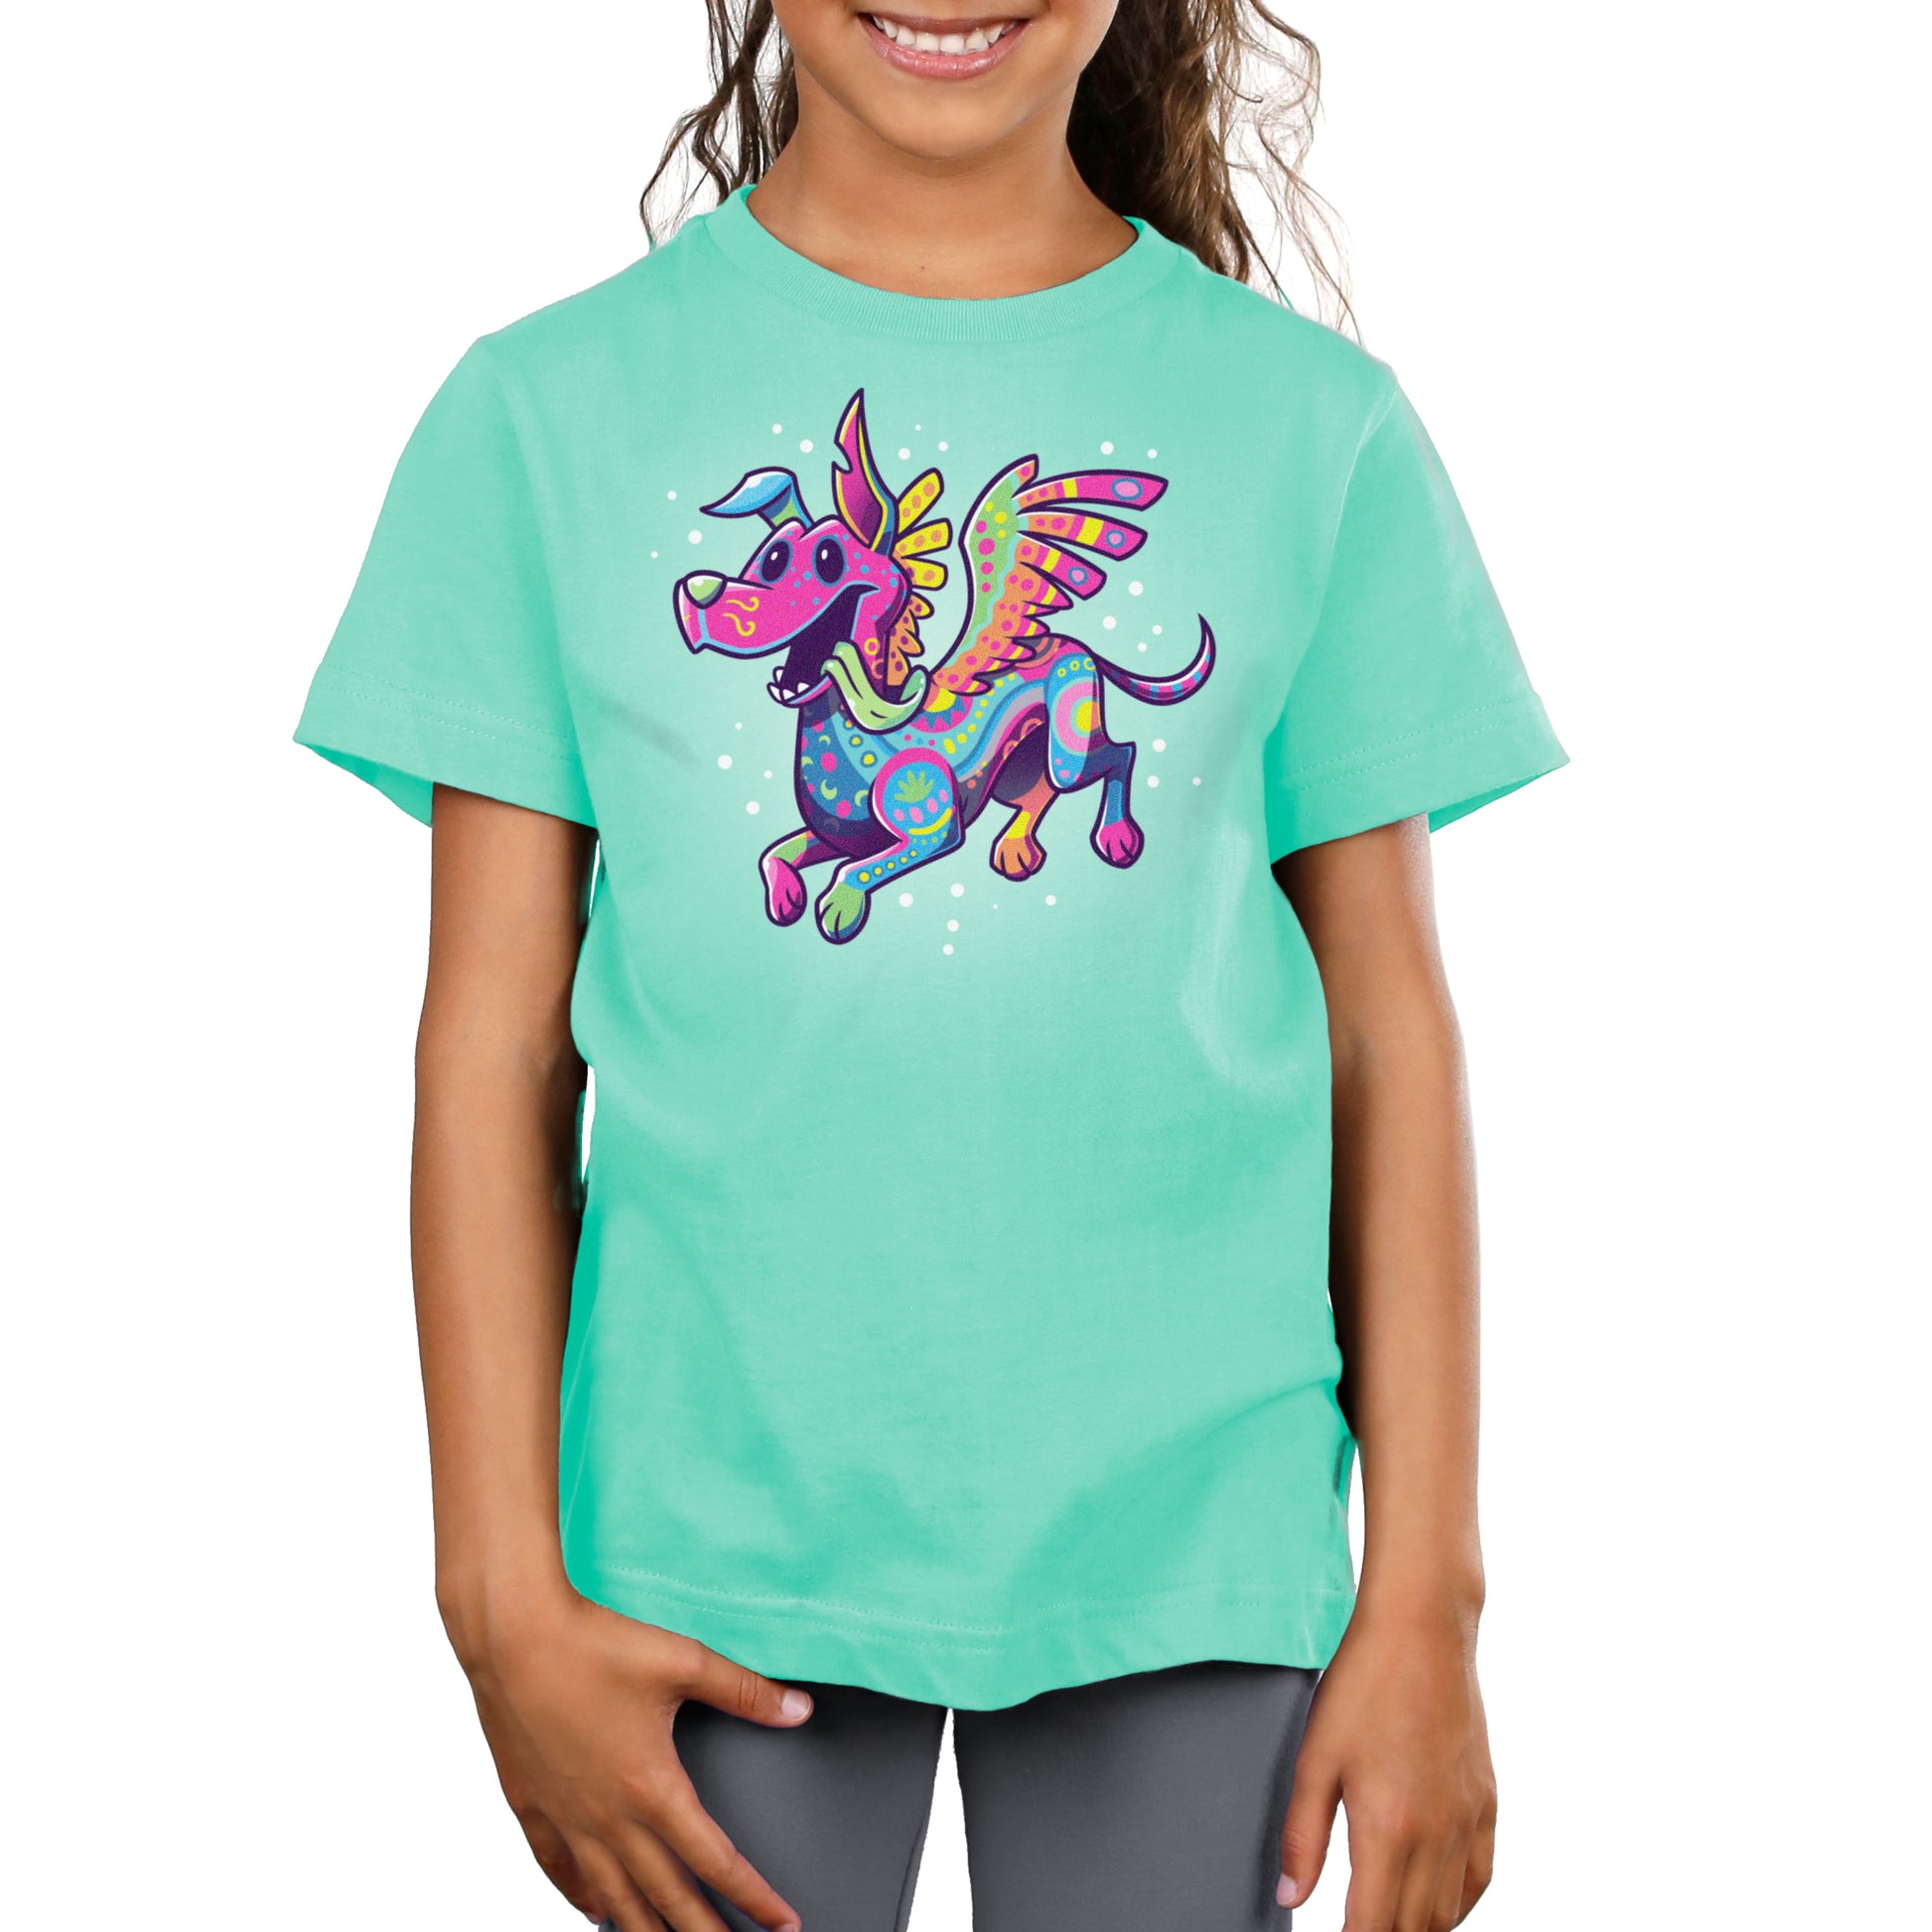 A girl wearing an officially licensed Pixar Dante the Alebrije turquoise T-shirt with a colorful dragon on it.